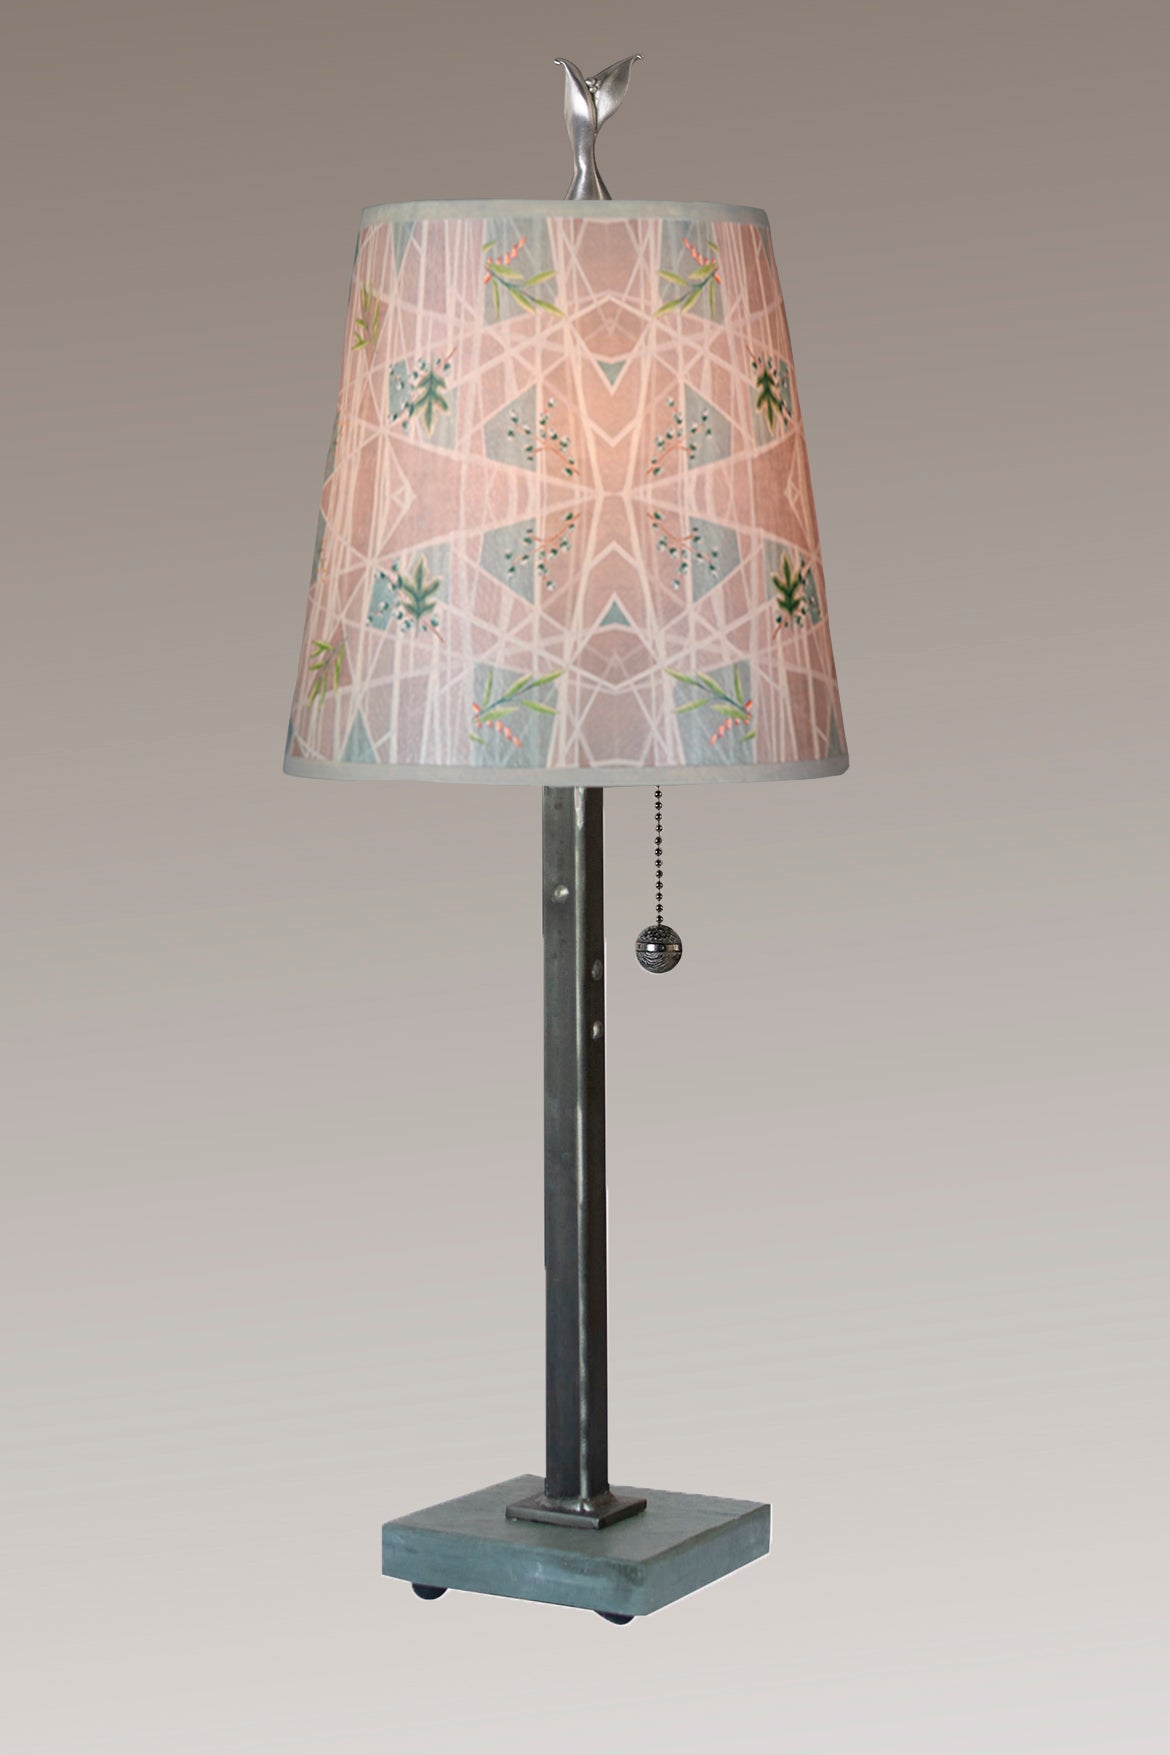 Janna Ugone &amp; Co Table Lamps Steel Table Lamp with Small Drum Shade in Prism